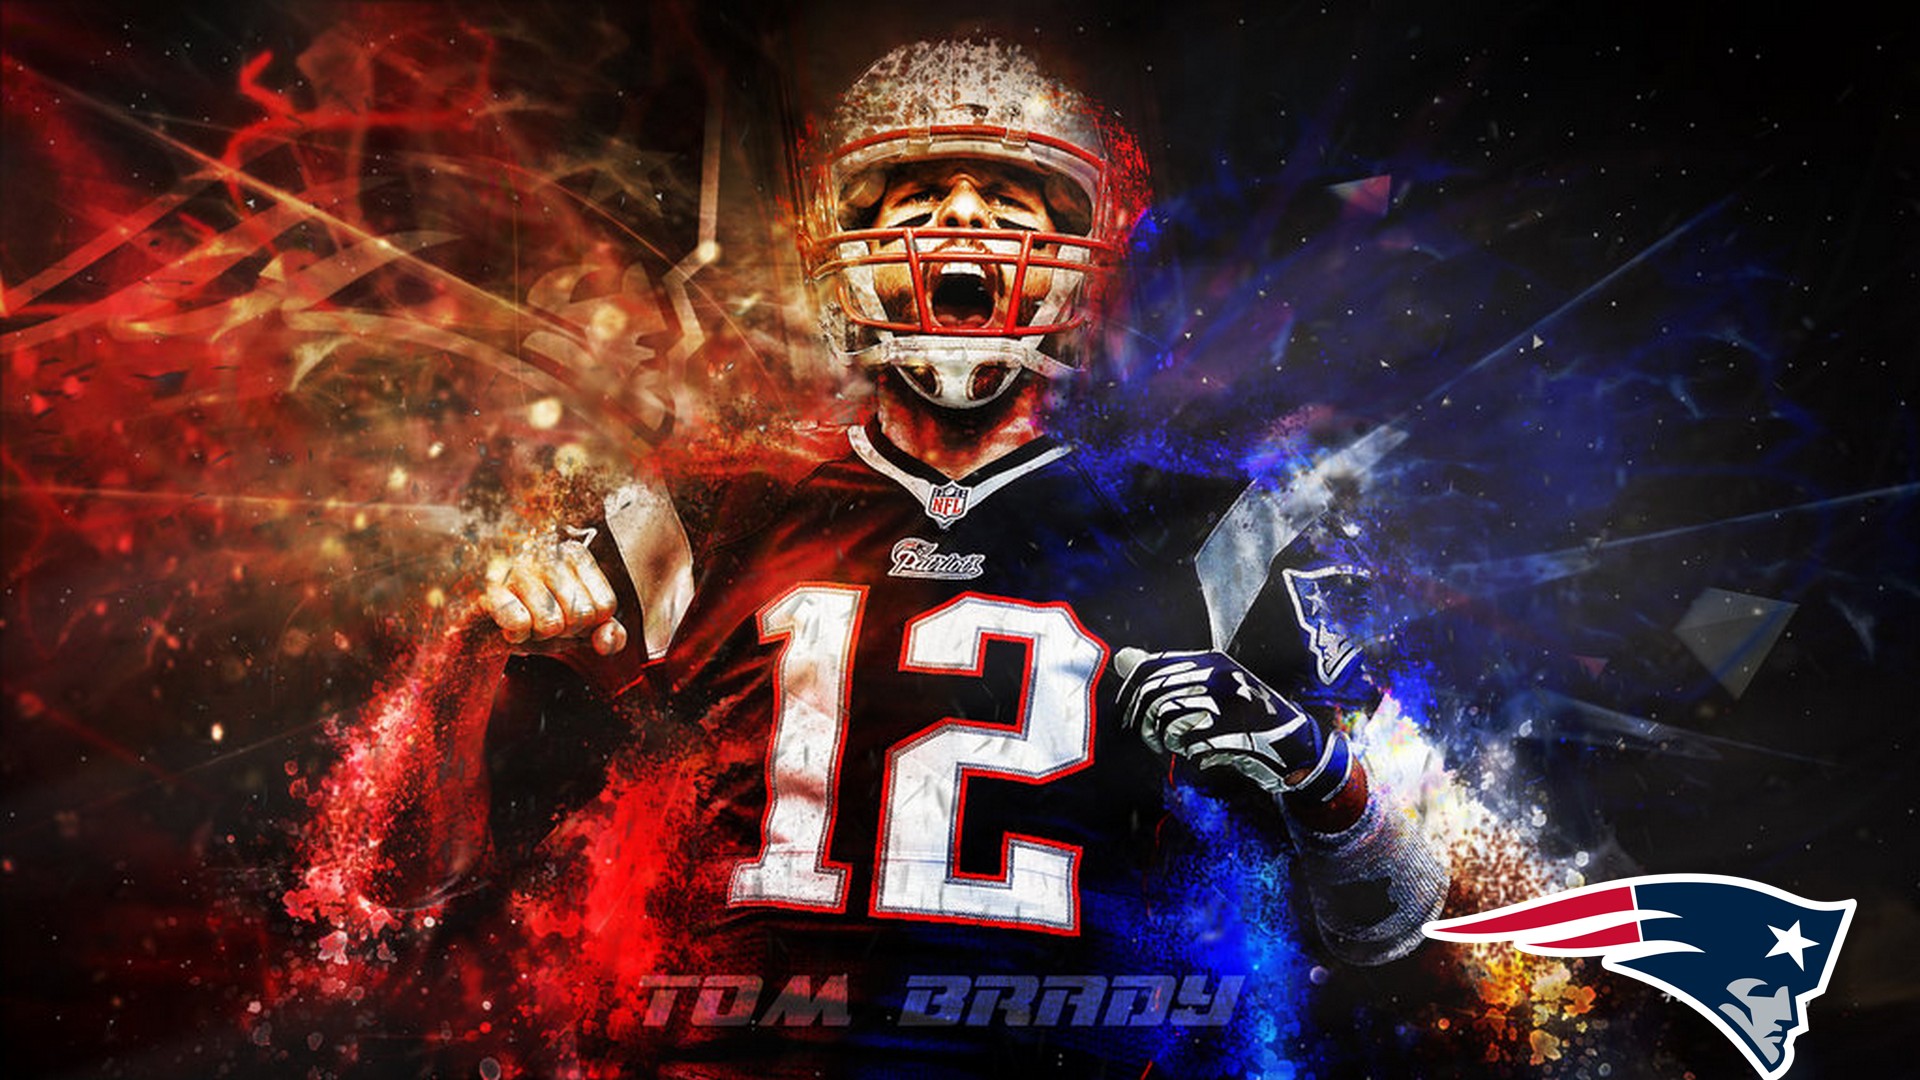 HD Tom Brady Backgrounds with resolution 1920x1080 pixel. You can make this wallpaper for your Mac or Windows Desktop Background, iPhone, Android or Tablet and another Smartphone device